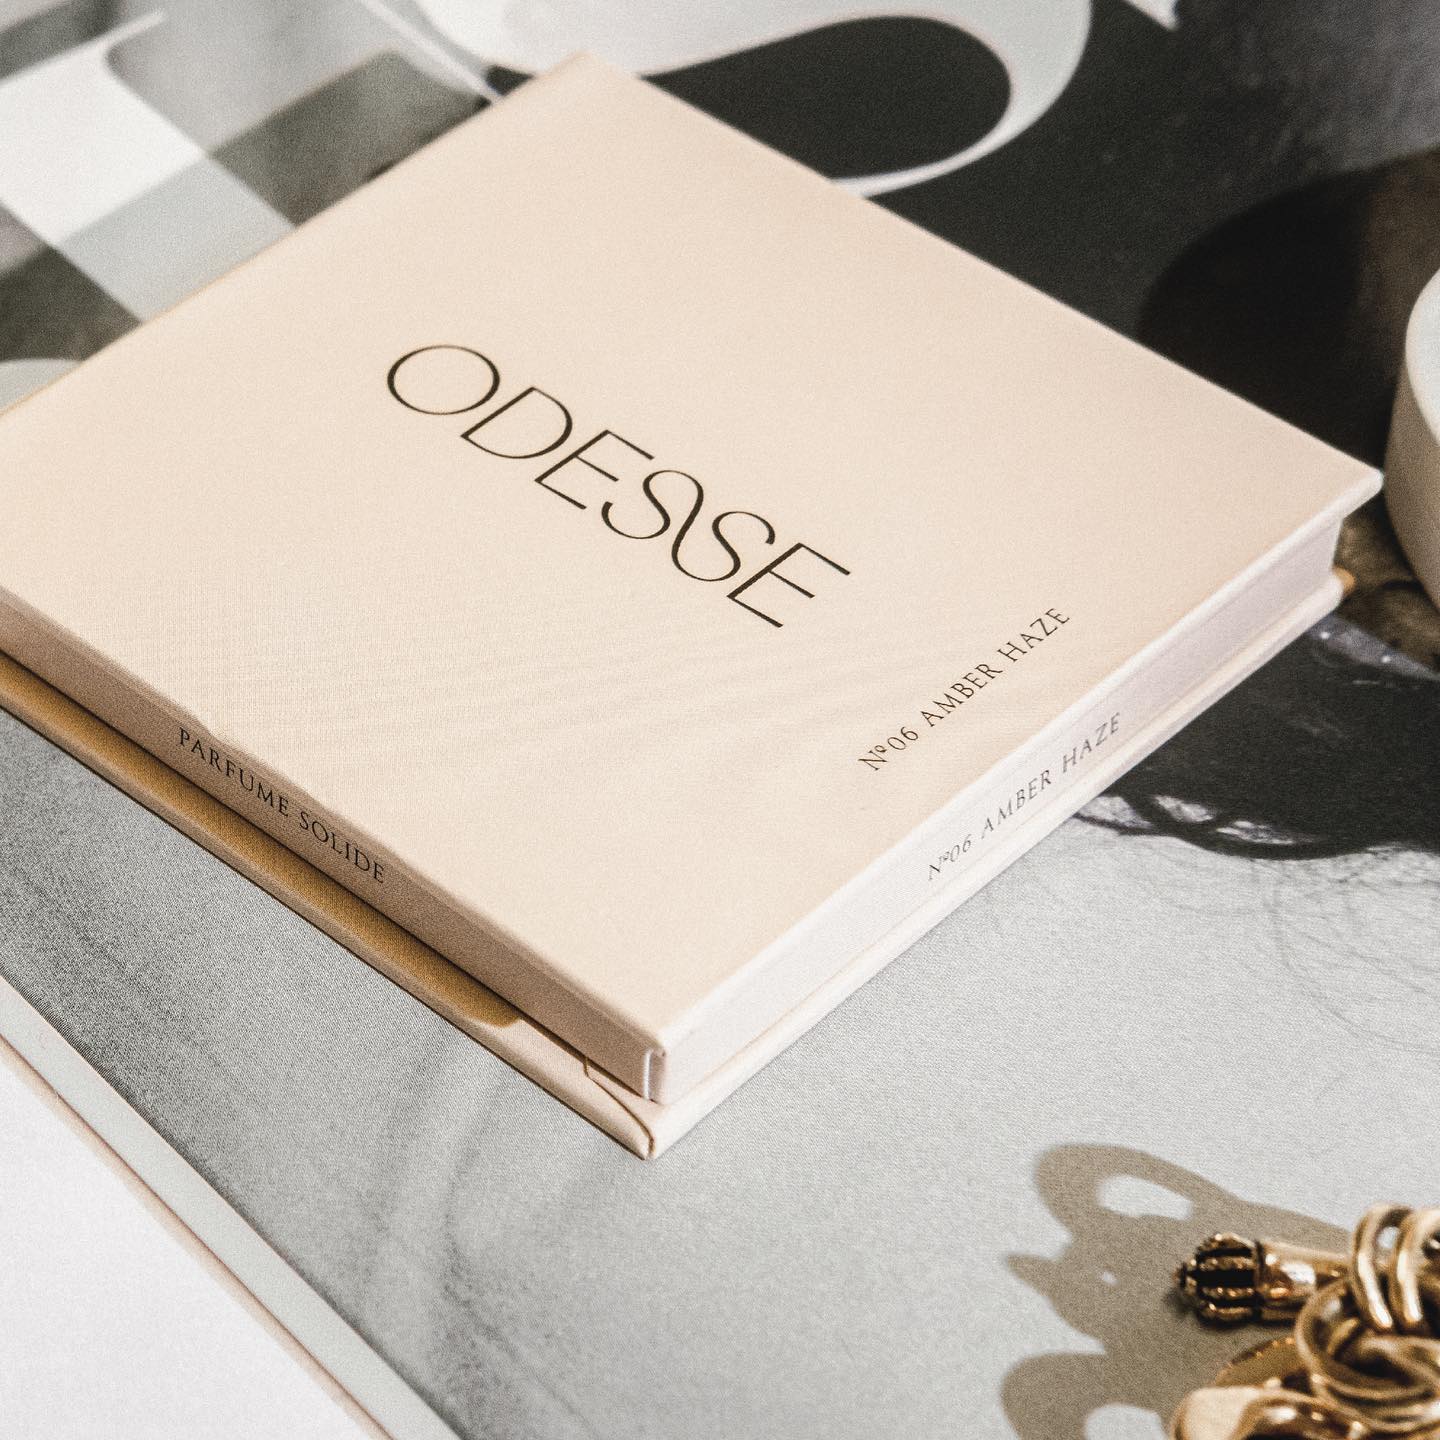 Odesse’s refillable perfumes will save time, money, and the planet. Reduce your overall waste by adding her to your routine.